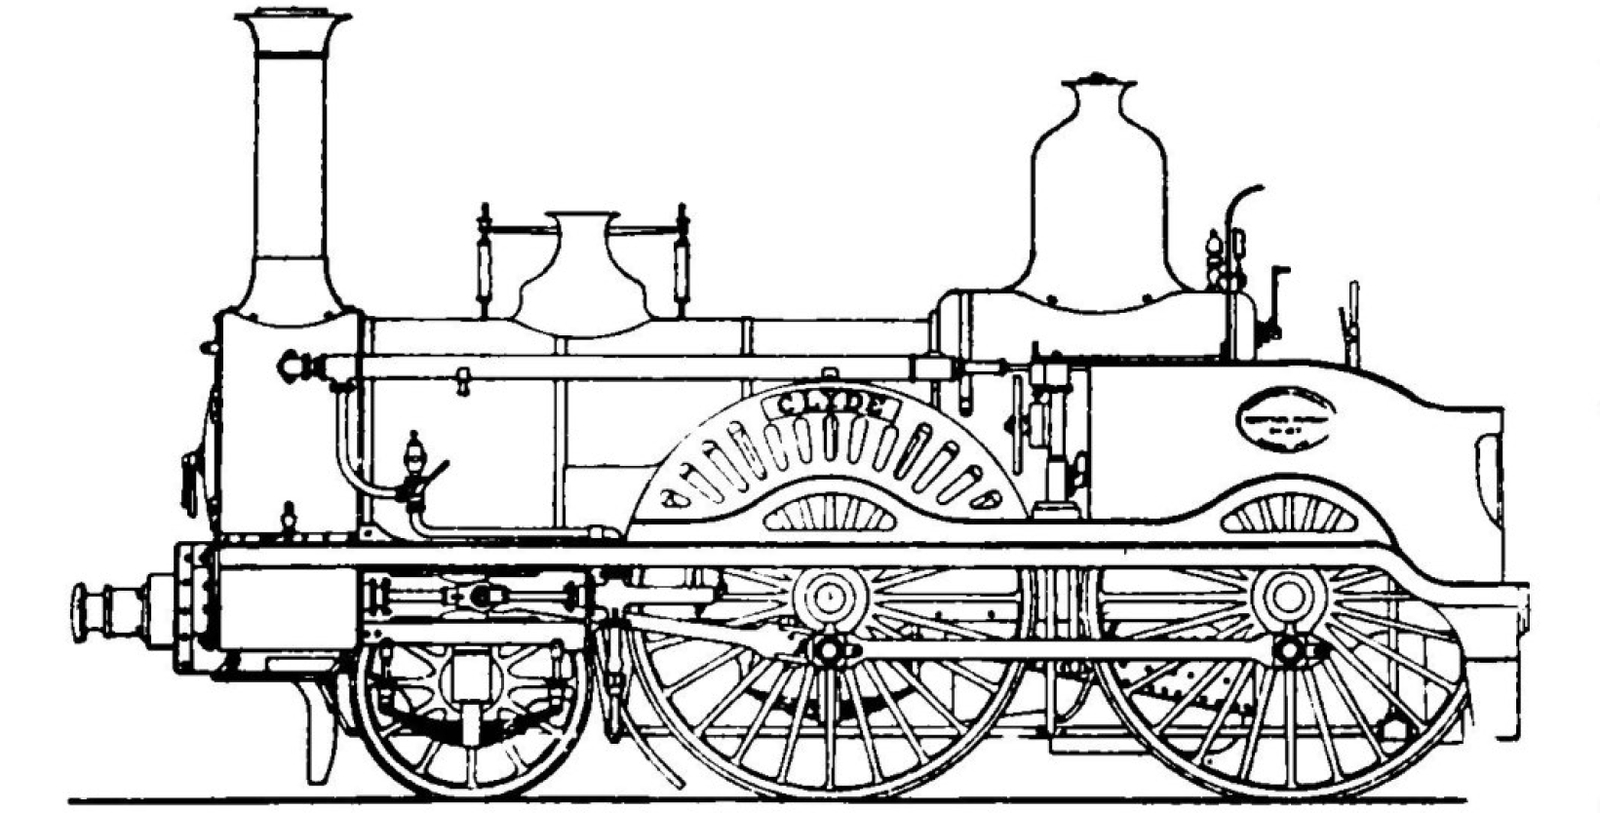 Schematic drawing of No. 157 “Clyde”